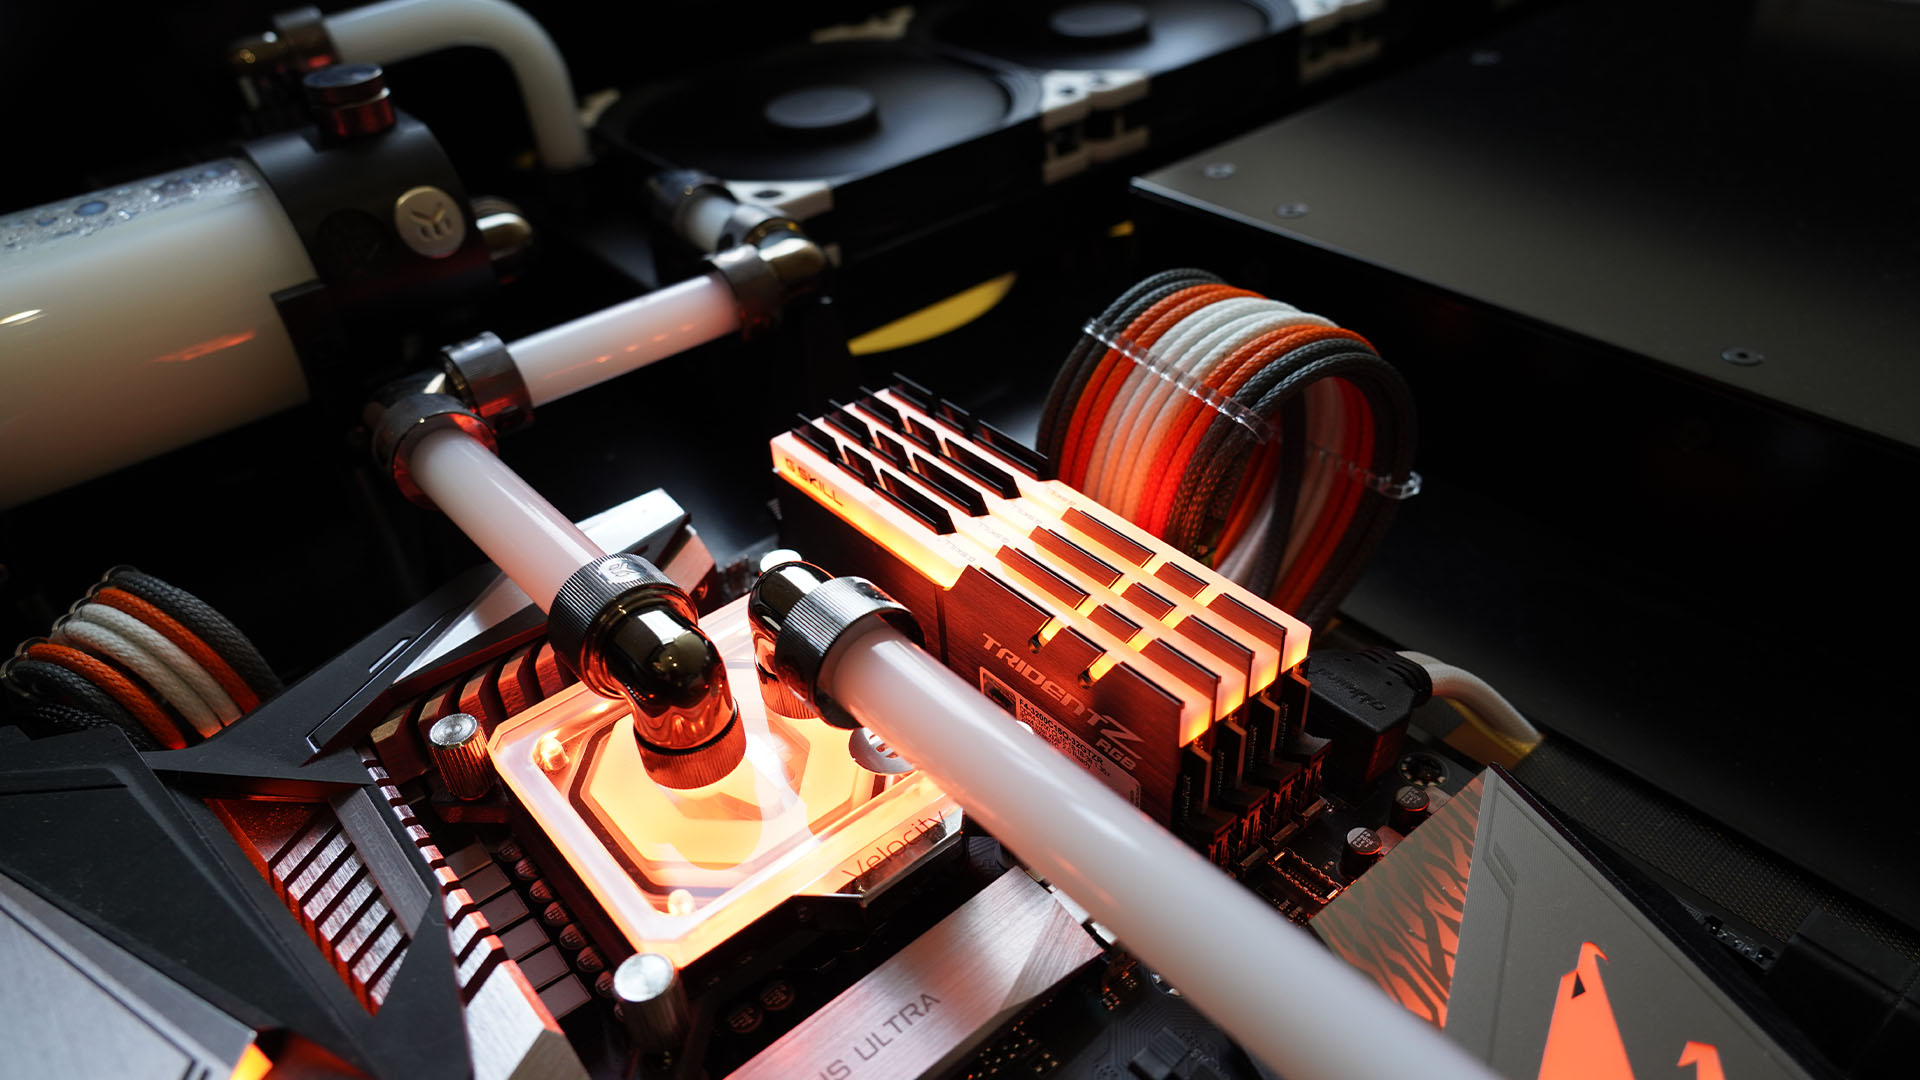 The watercooling loop inside the omega desk pc